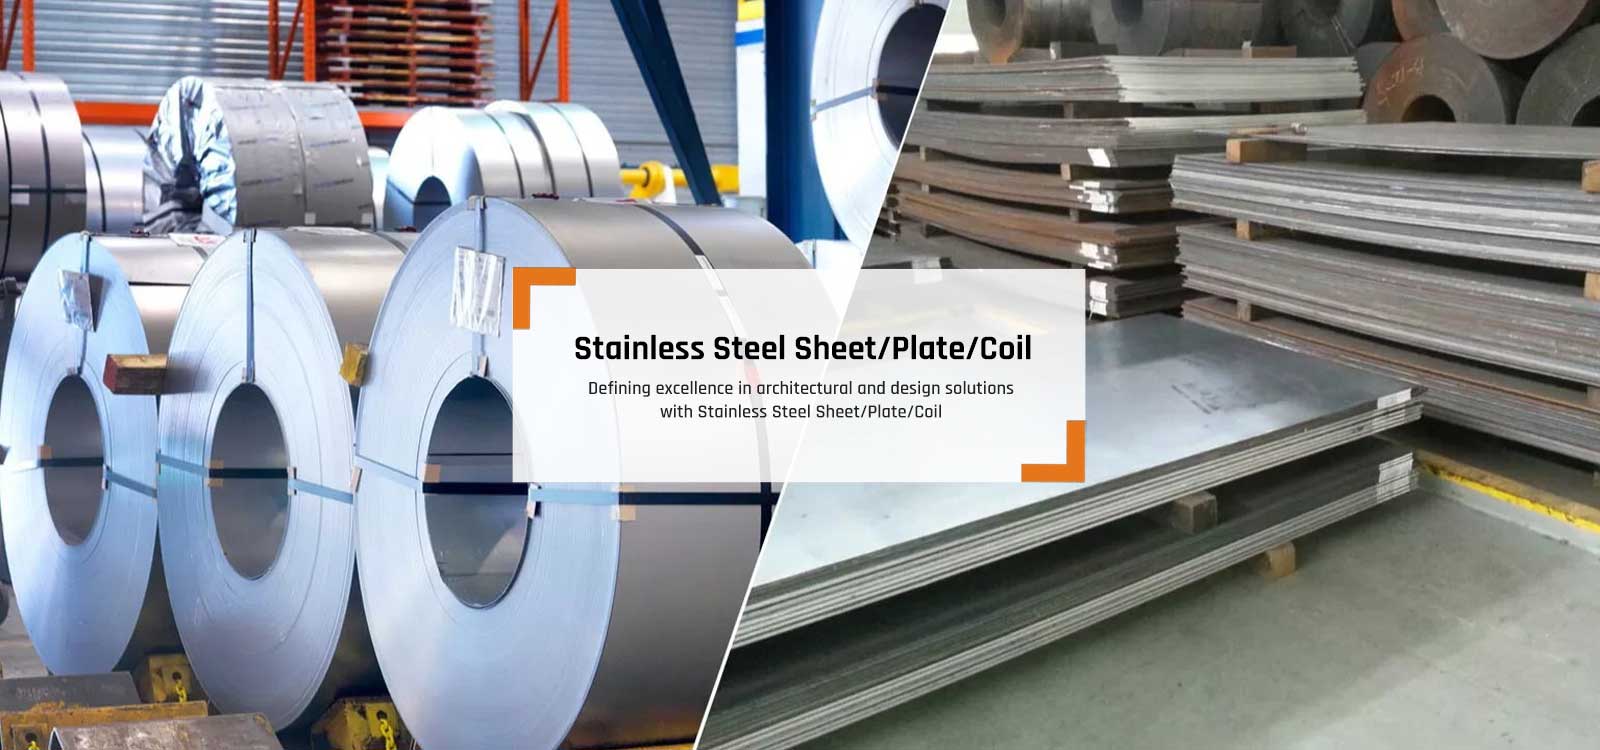 Stainless Steel Sheet Plates Coils Suppliers in Mumbai